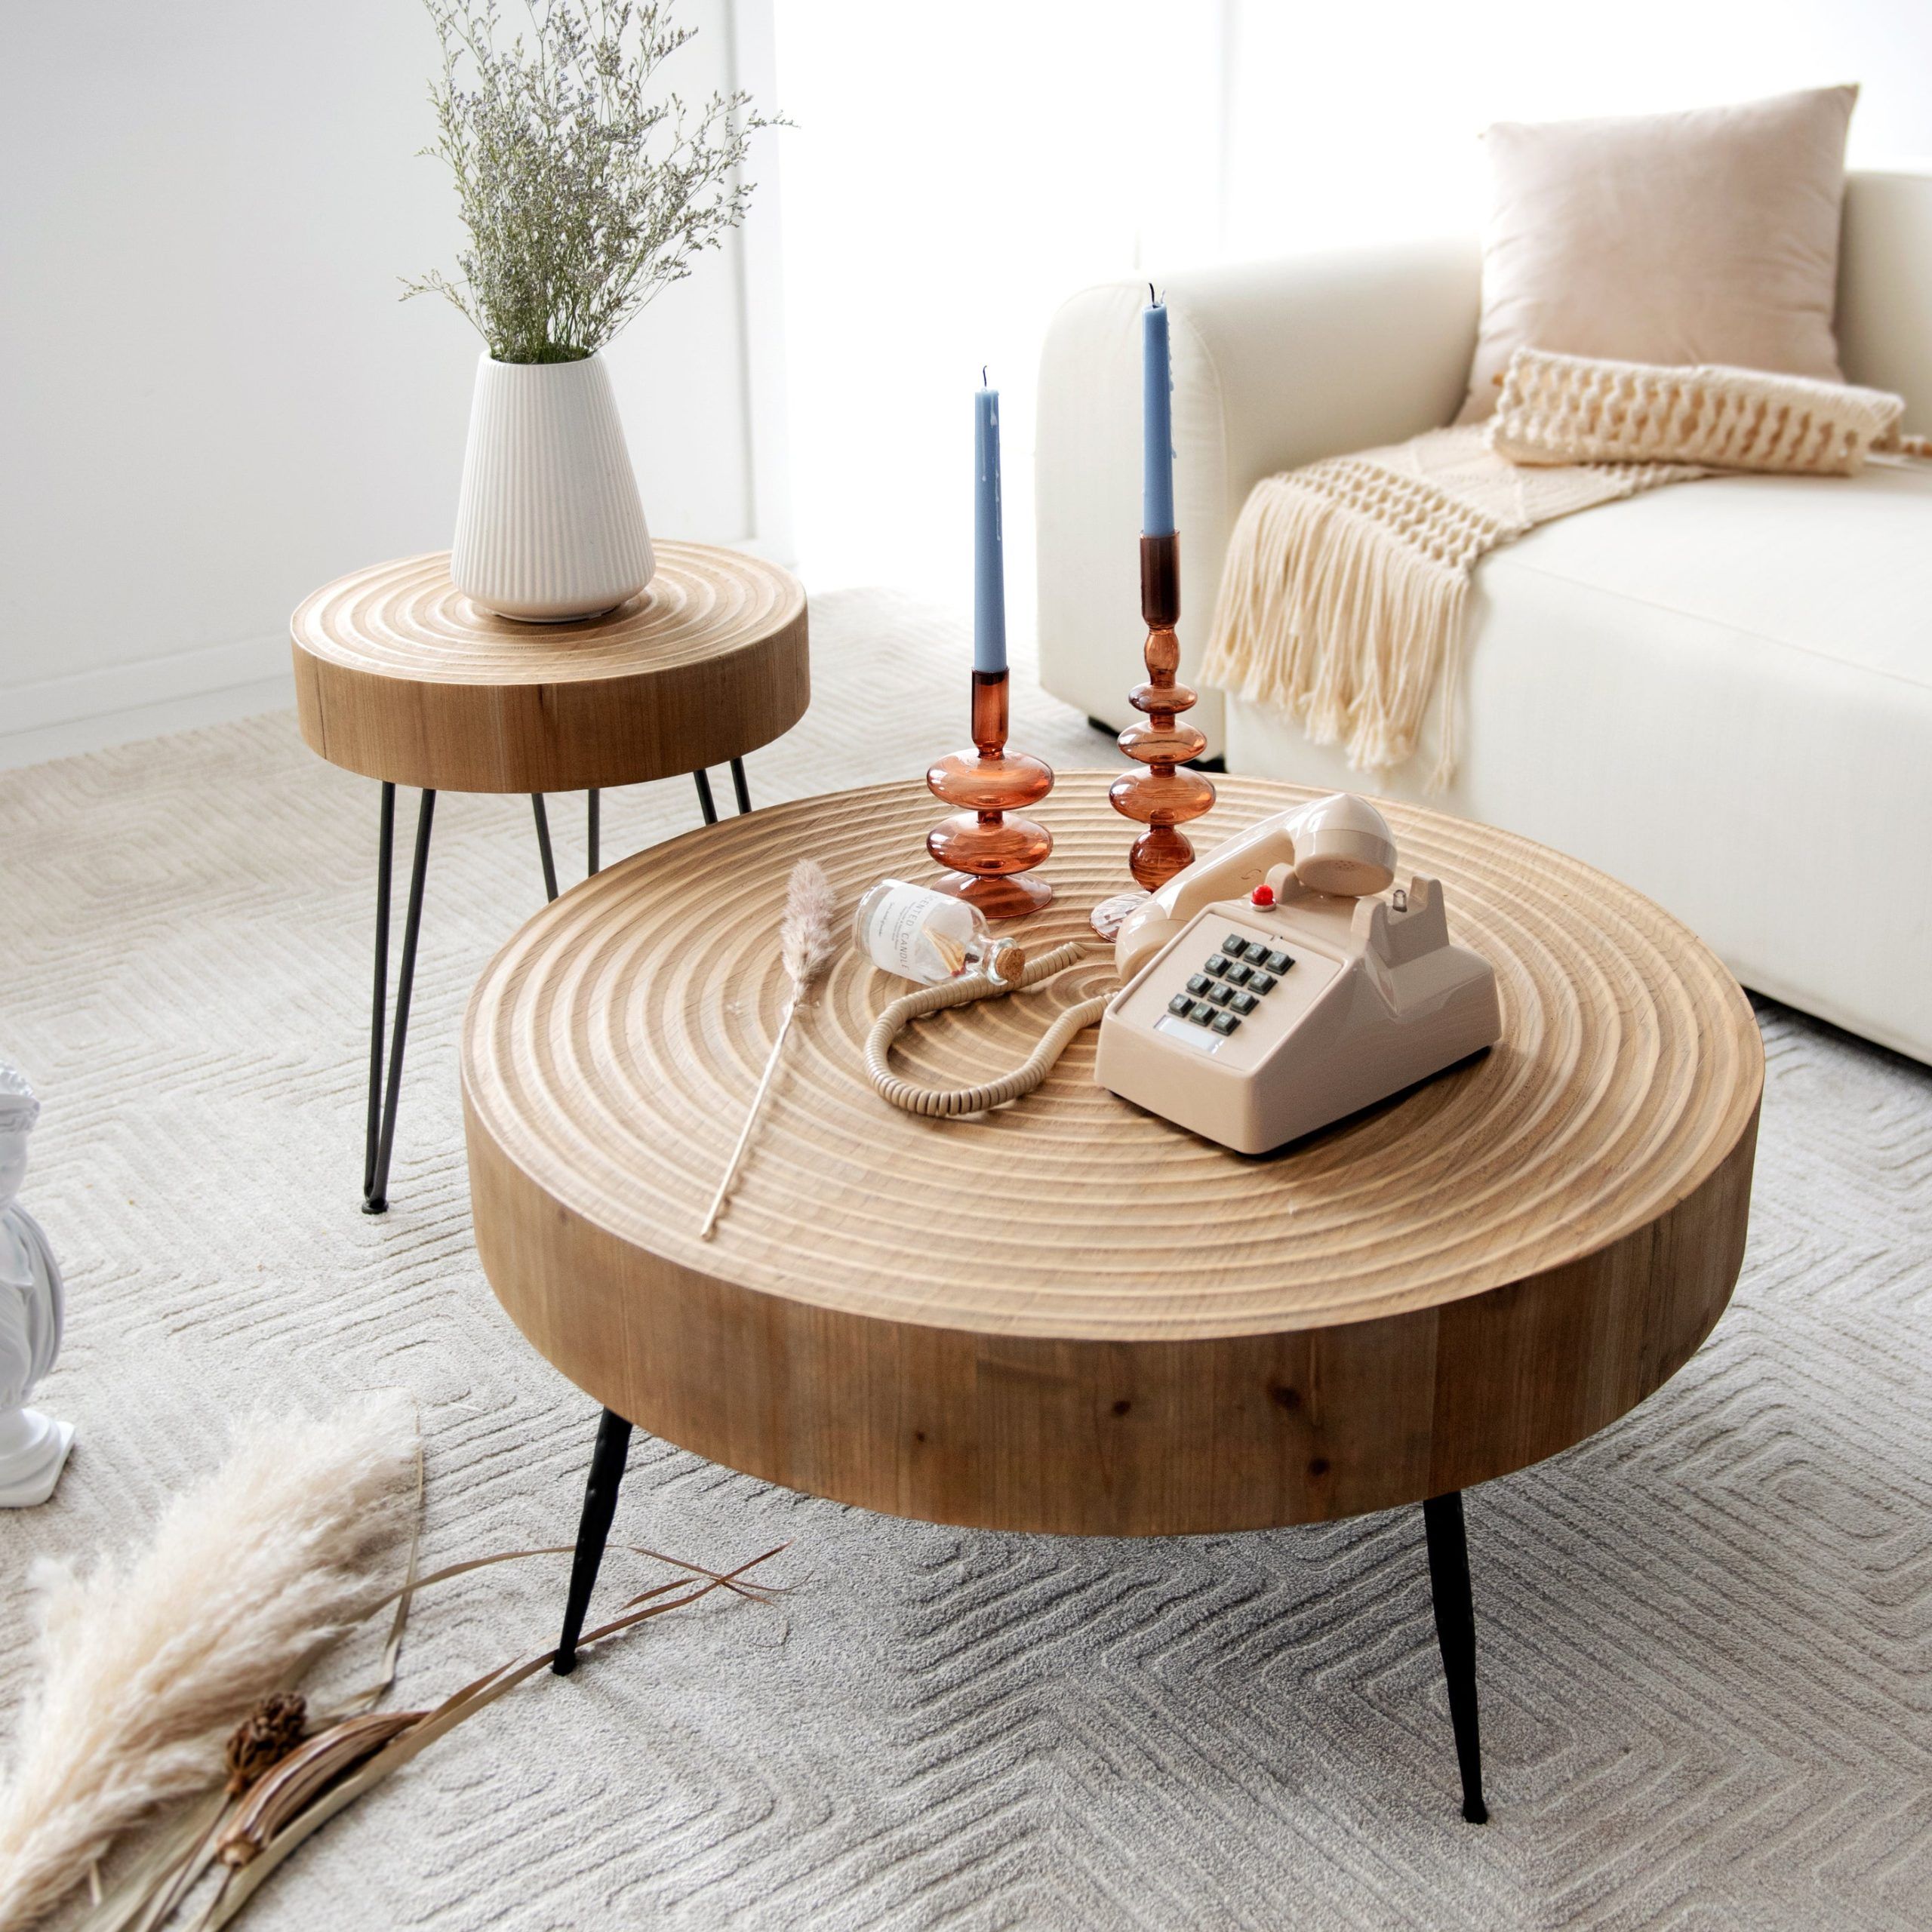 Cozayh 2 Piece Modern Farmhouse Living Room Coffee Table Set, Round Intended For Modern Farmhouse Coffee Table Sets (Gallery 8 of 20)